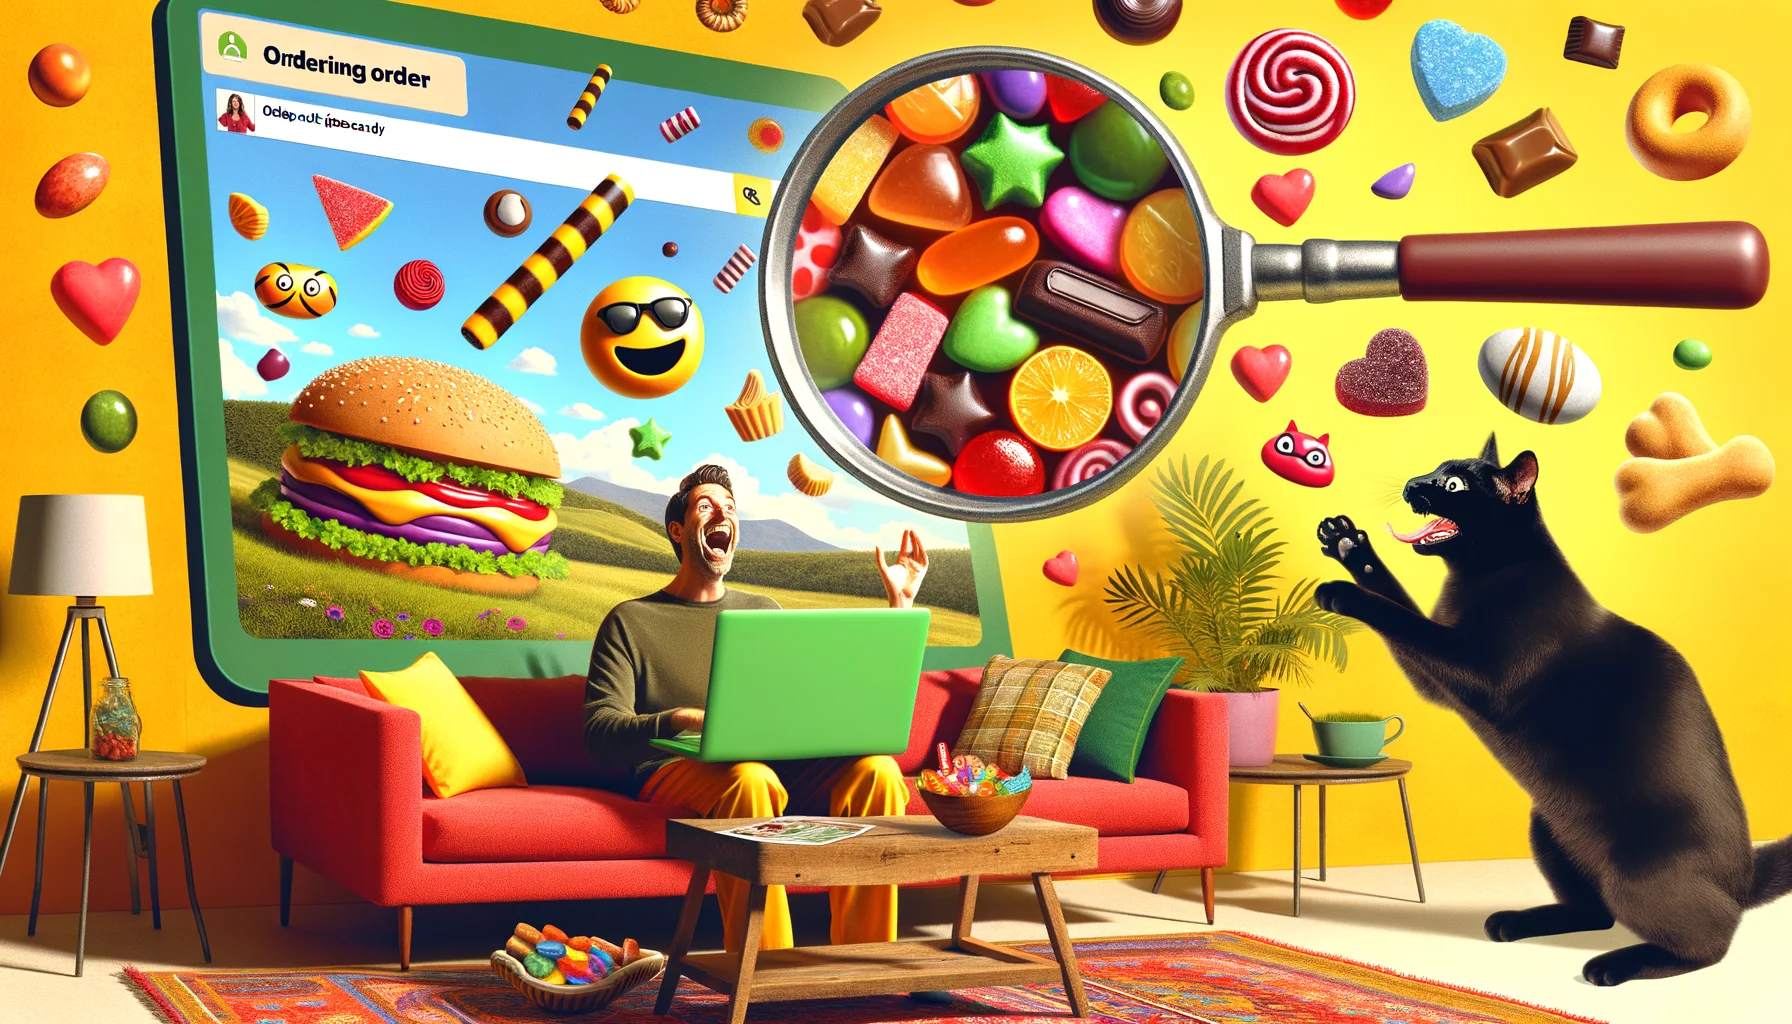 Visualize a scenario that humorously represents ordering nut-free candy online. The setting takes place on a warm sunny day, where a laughing Caucasian female using an oversized green laptop places an order. Her living room is a feast of colors, with vibrant red couch and yellow walls. A huge magnified image of the mouth-watering candies pops up on the screen; they are an assortment of colorful, nut-free candies, look enticingly glossy, and are shaped like different hilarious emojis. A surprised black cat jumping off the couch in response to the candy explosion adds to the comical theme.